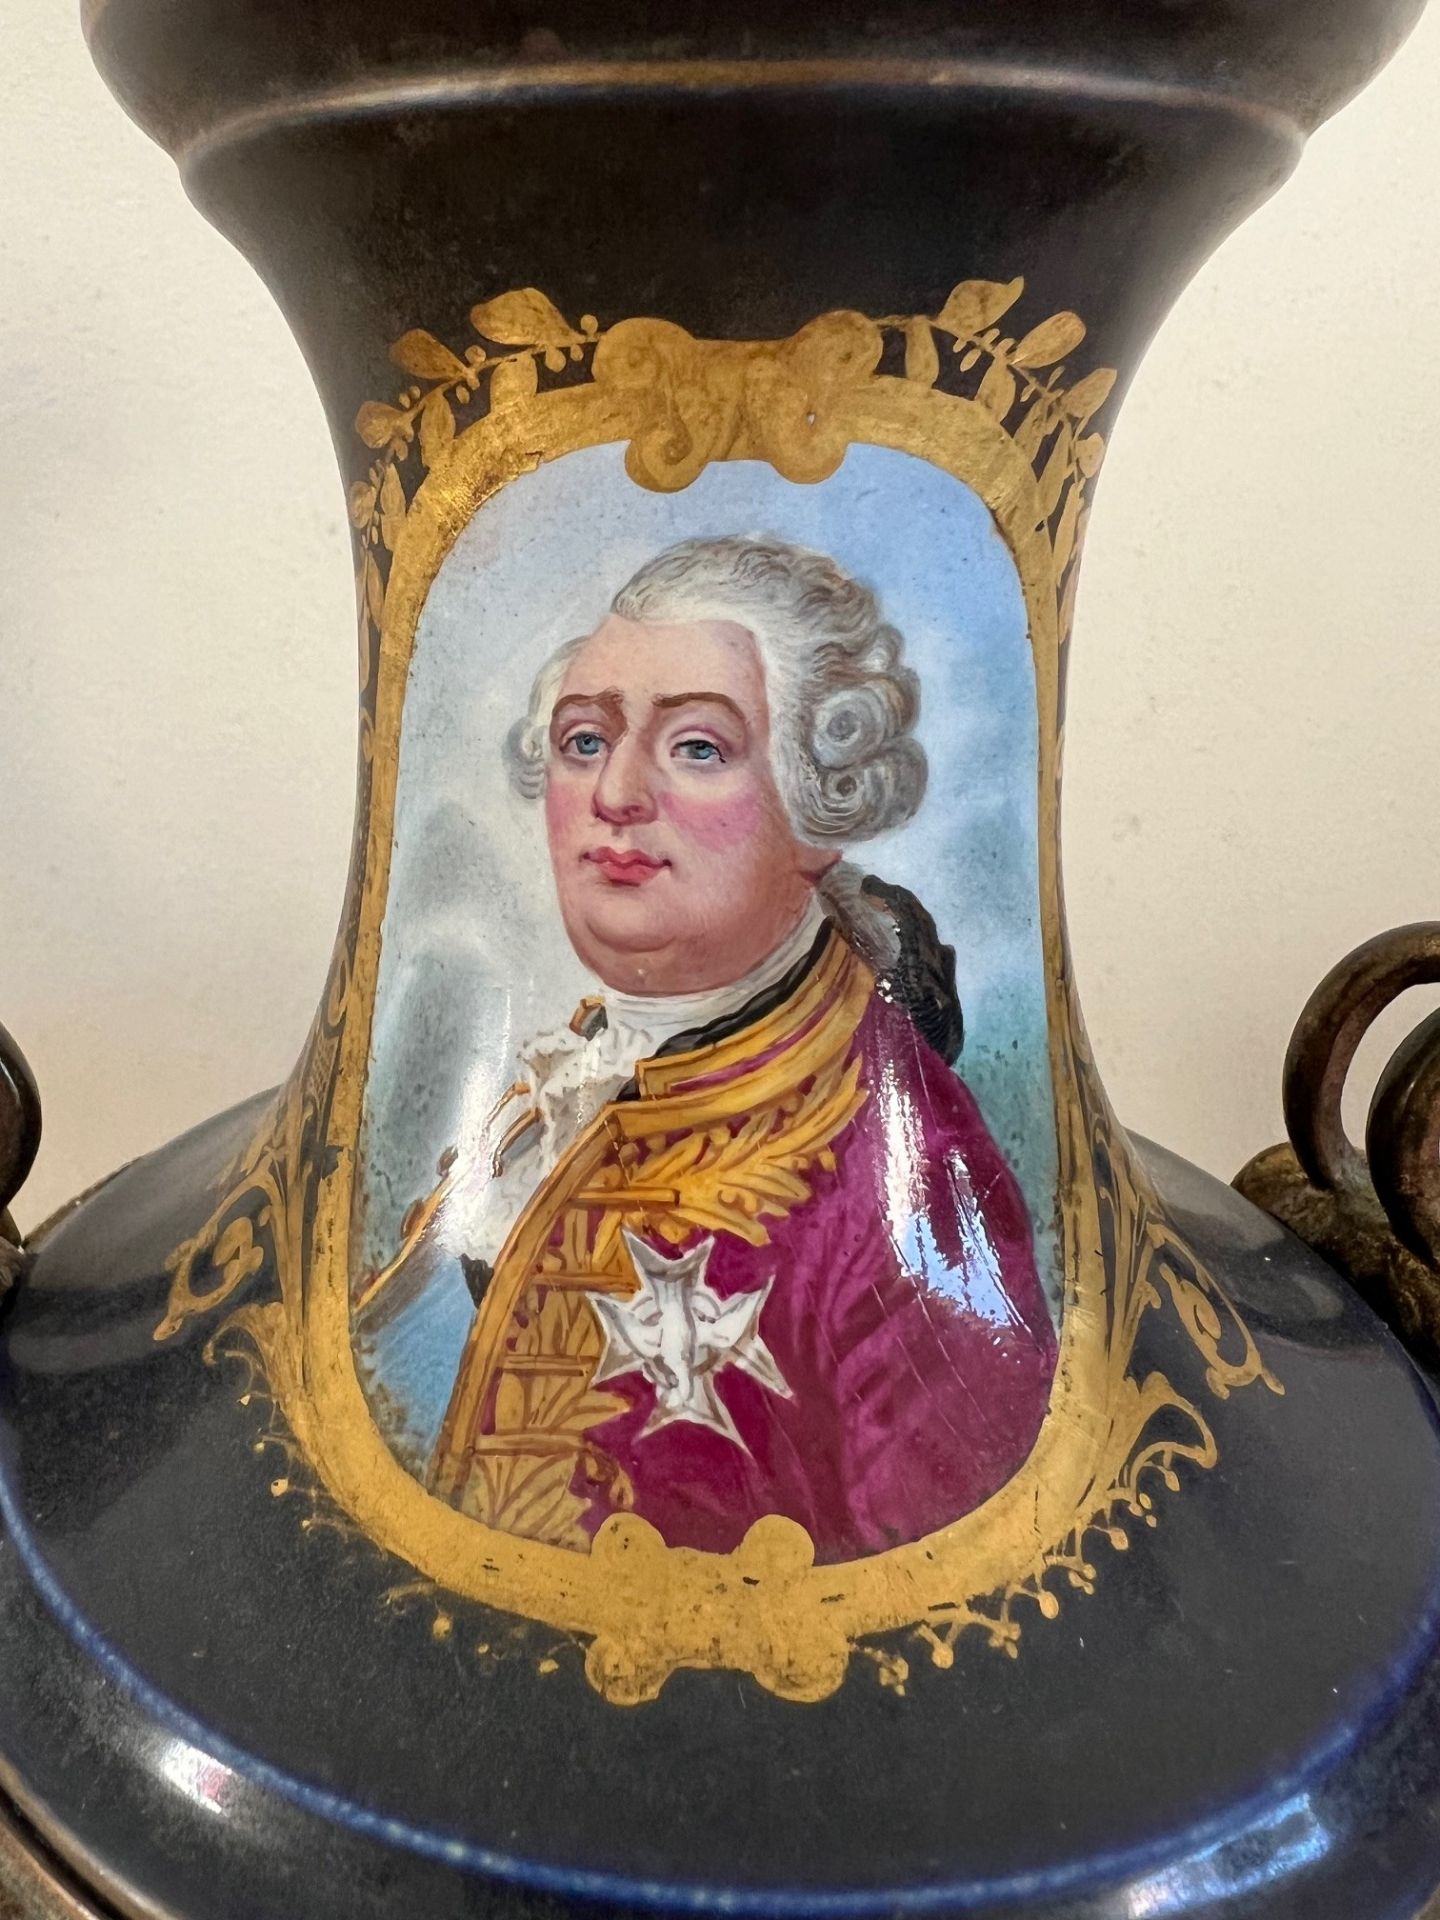 CONTINENTAL POTTERY VASE WITH ORMOLU MOUNTS DEPICTING LOUIS XVI OF FRANCE, HAND DECORATED PANELS - Image 2 of 6